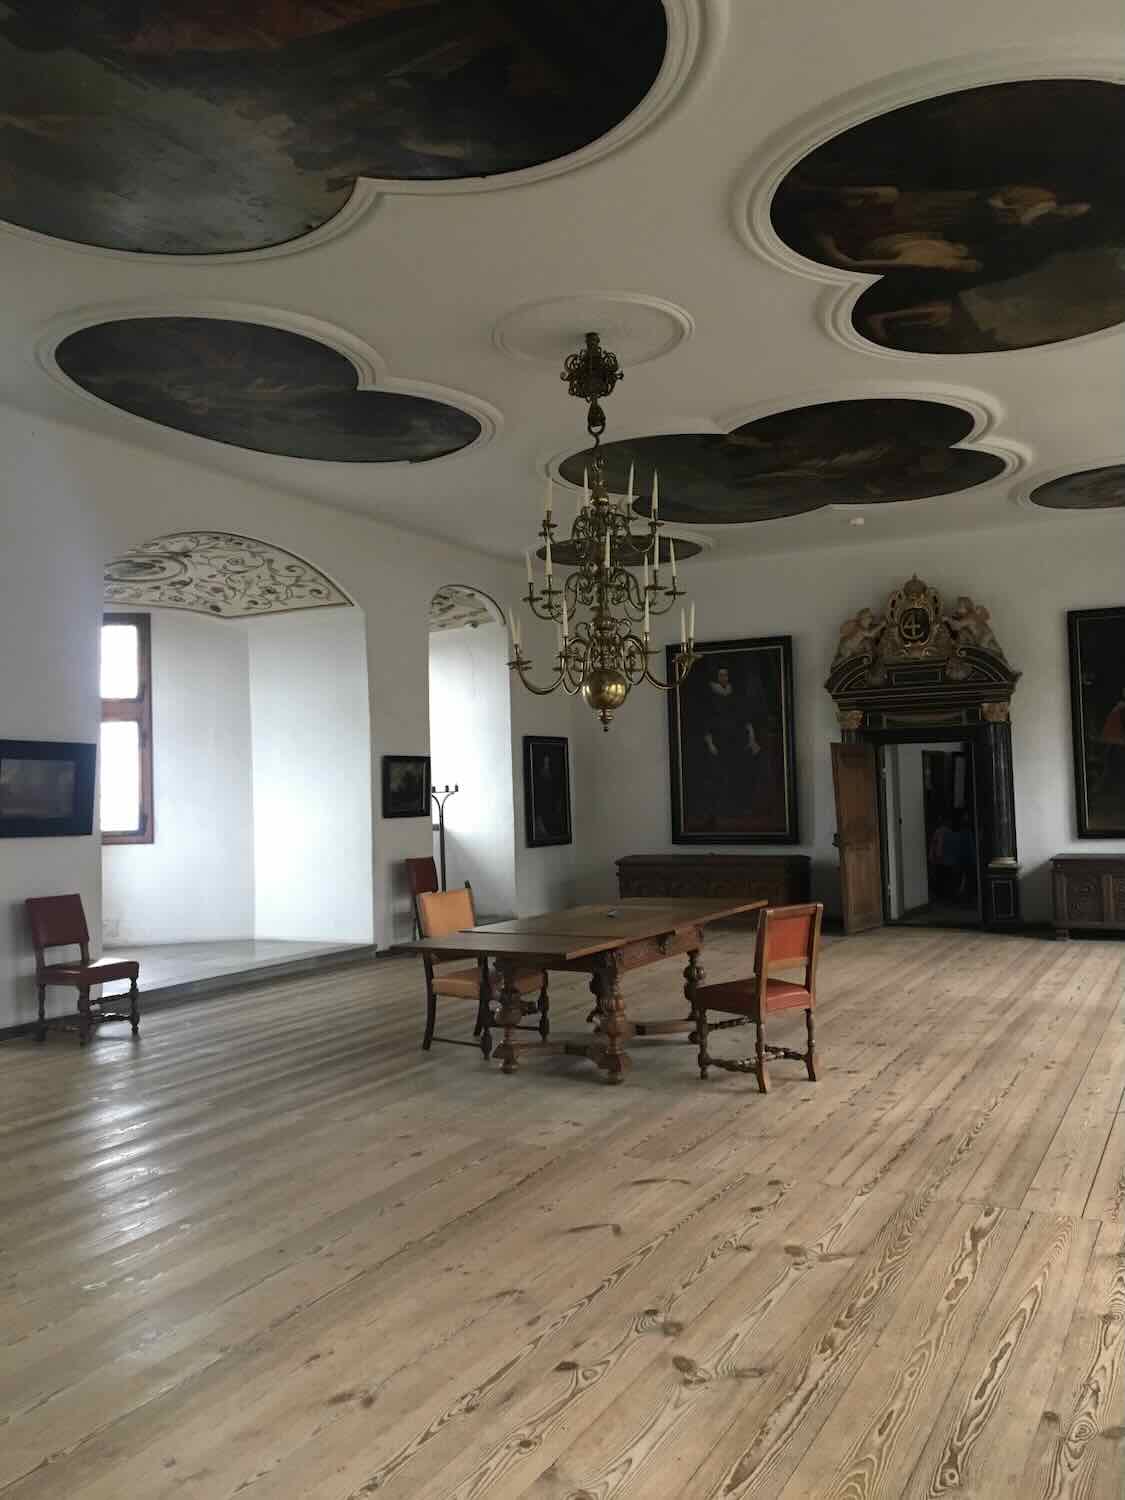 Interior of Kronborg Castle showcasing ornate furnishings and historical artifacts